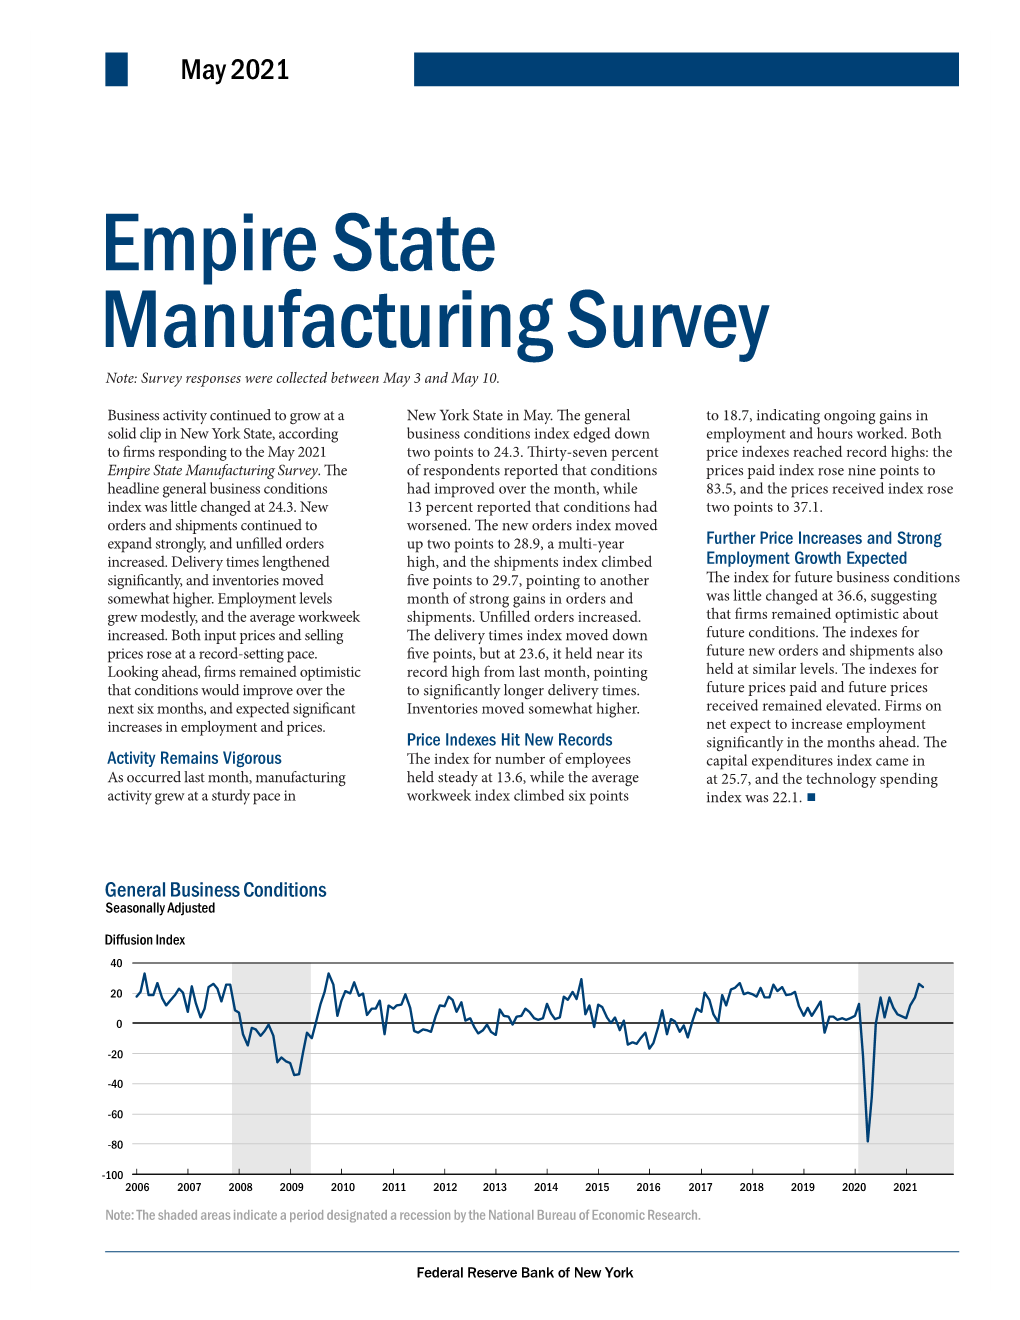 Empire State Manufacturing Survey Note: Survey Responses Were Collected Between May 3 and May 10